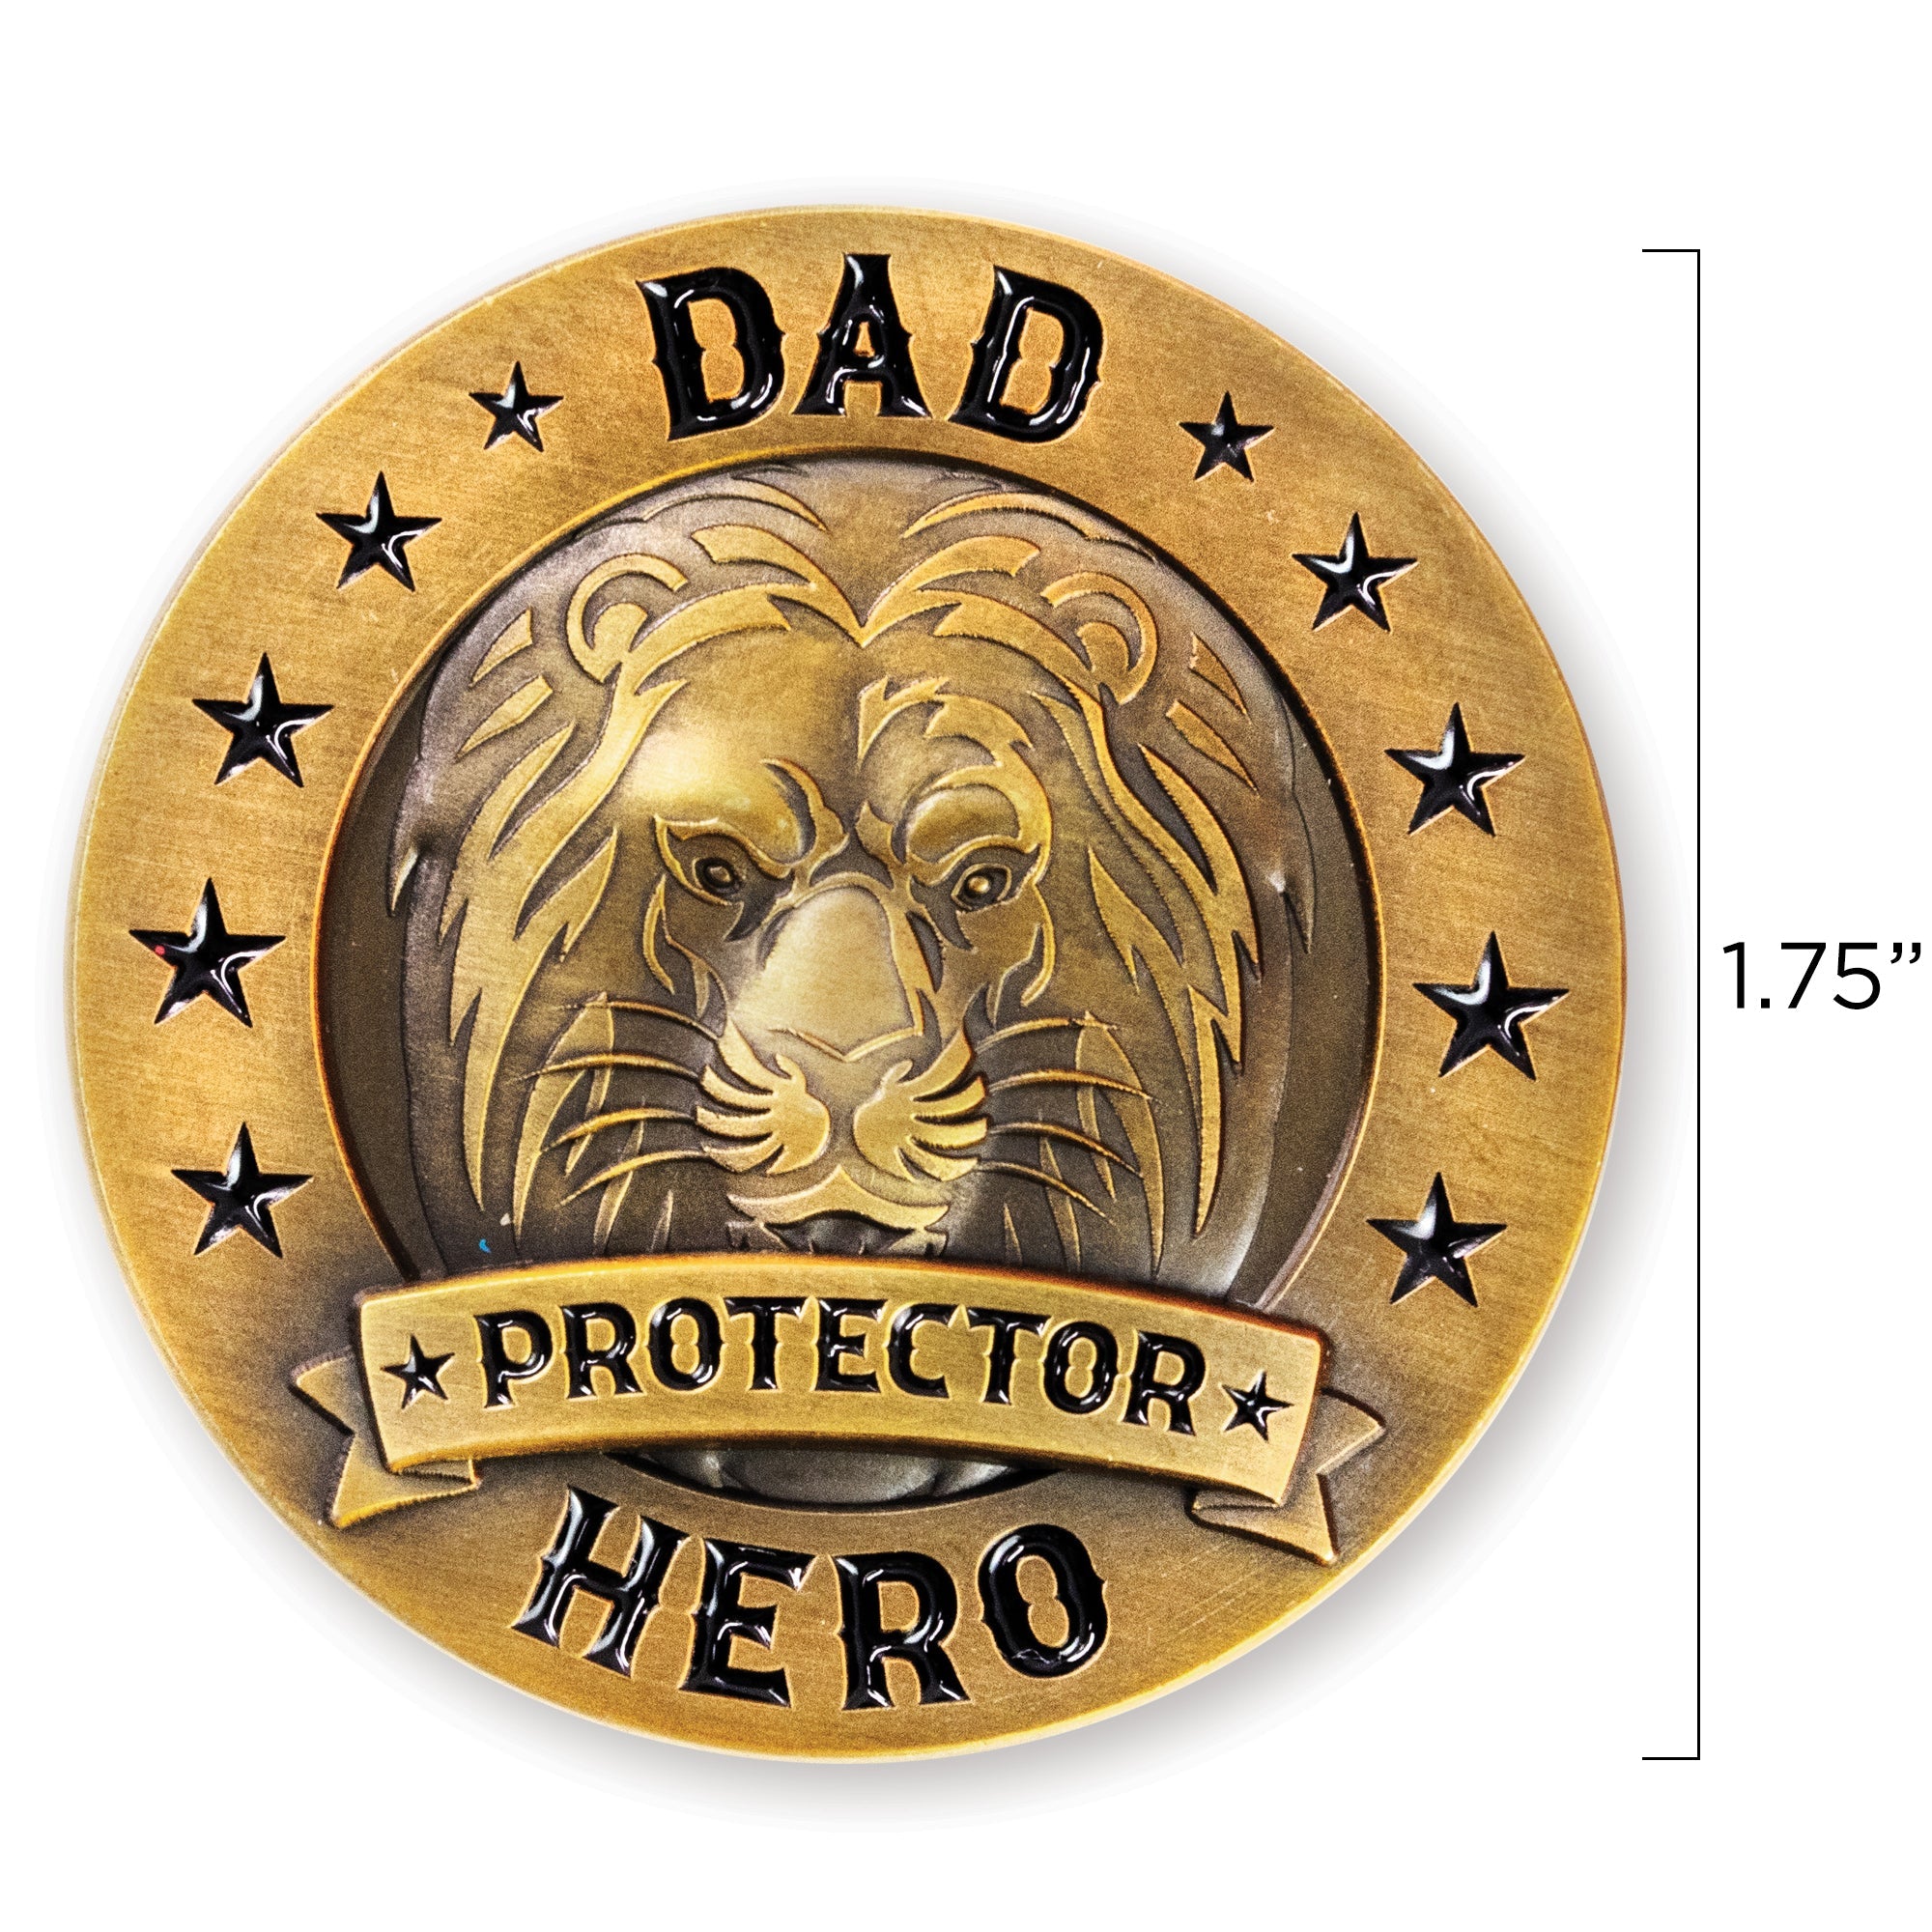 View of the front of the Father's day challenge coin displaying the 1.75" diameter